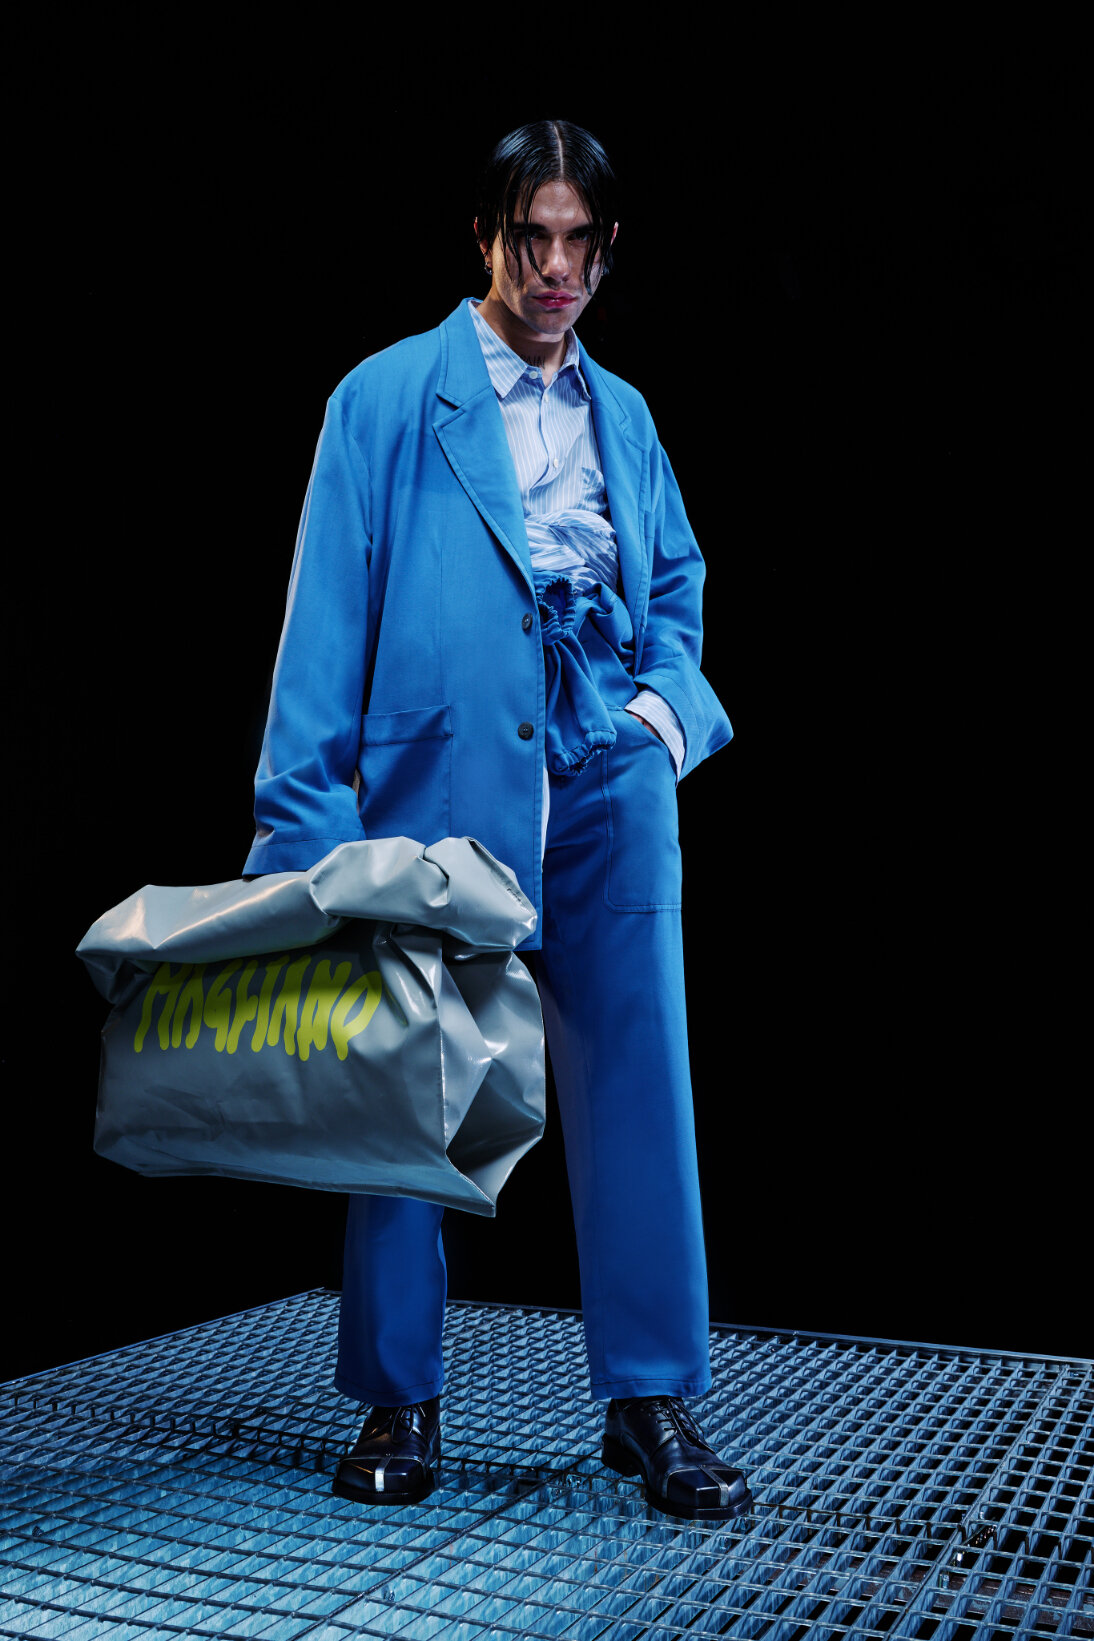  Model wears blue suit and holds large green bag for Magliano's Spring/Summer 2022 collection for Milan Fashion Week. 